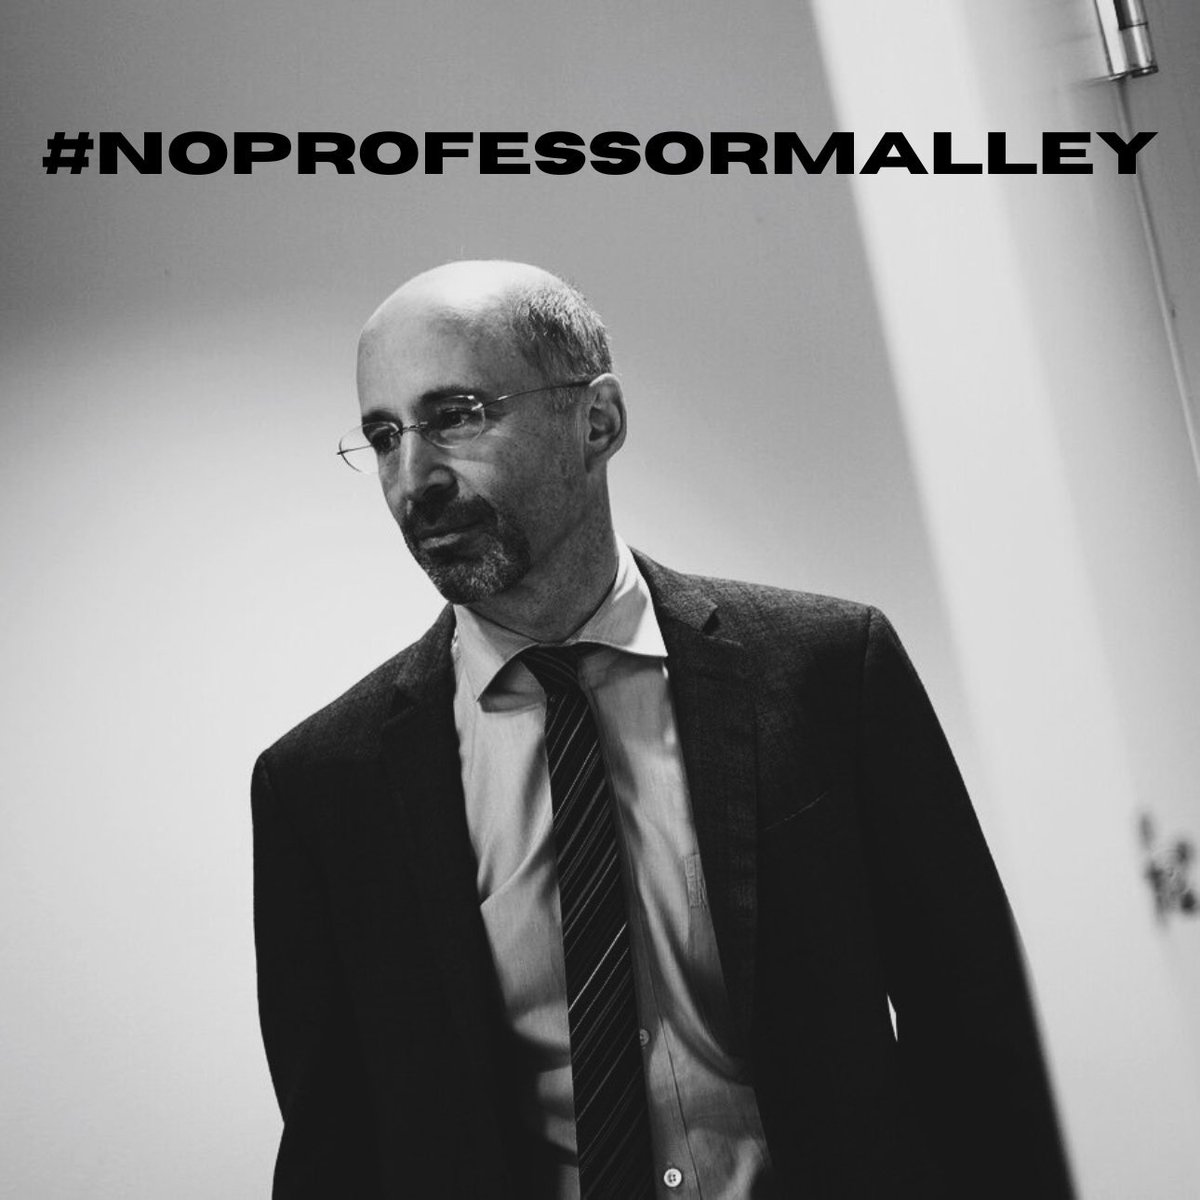 @sarahraviani @Princeton @Yale @StateDept @AmaneyJamal @EisgruberMemes @GovMurphy @CobertFormerOPM @GerkenHeather @pawprinceton @princetonian @YaleAlumni @yalealumnimag .@Princeton and @Yale hired Robert Malley while he's under FBI investigation for alleged mishandling of classified information. Given the situation, it's inappropriate for him to teach classes related to his @StateDept role. His job offer should be rescinded.

#NoProfessorMalley